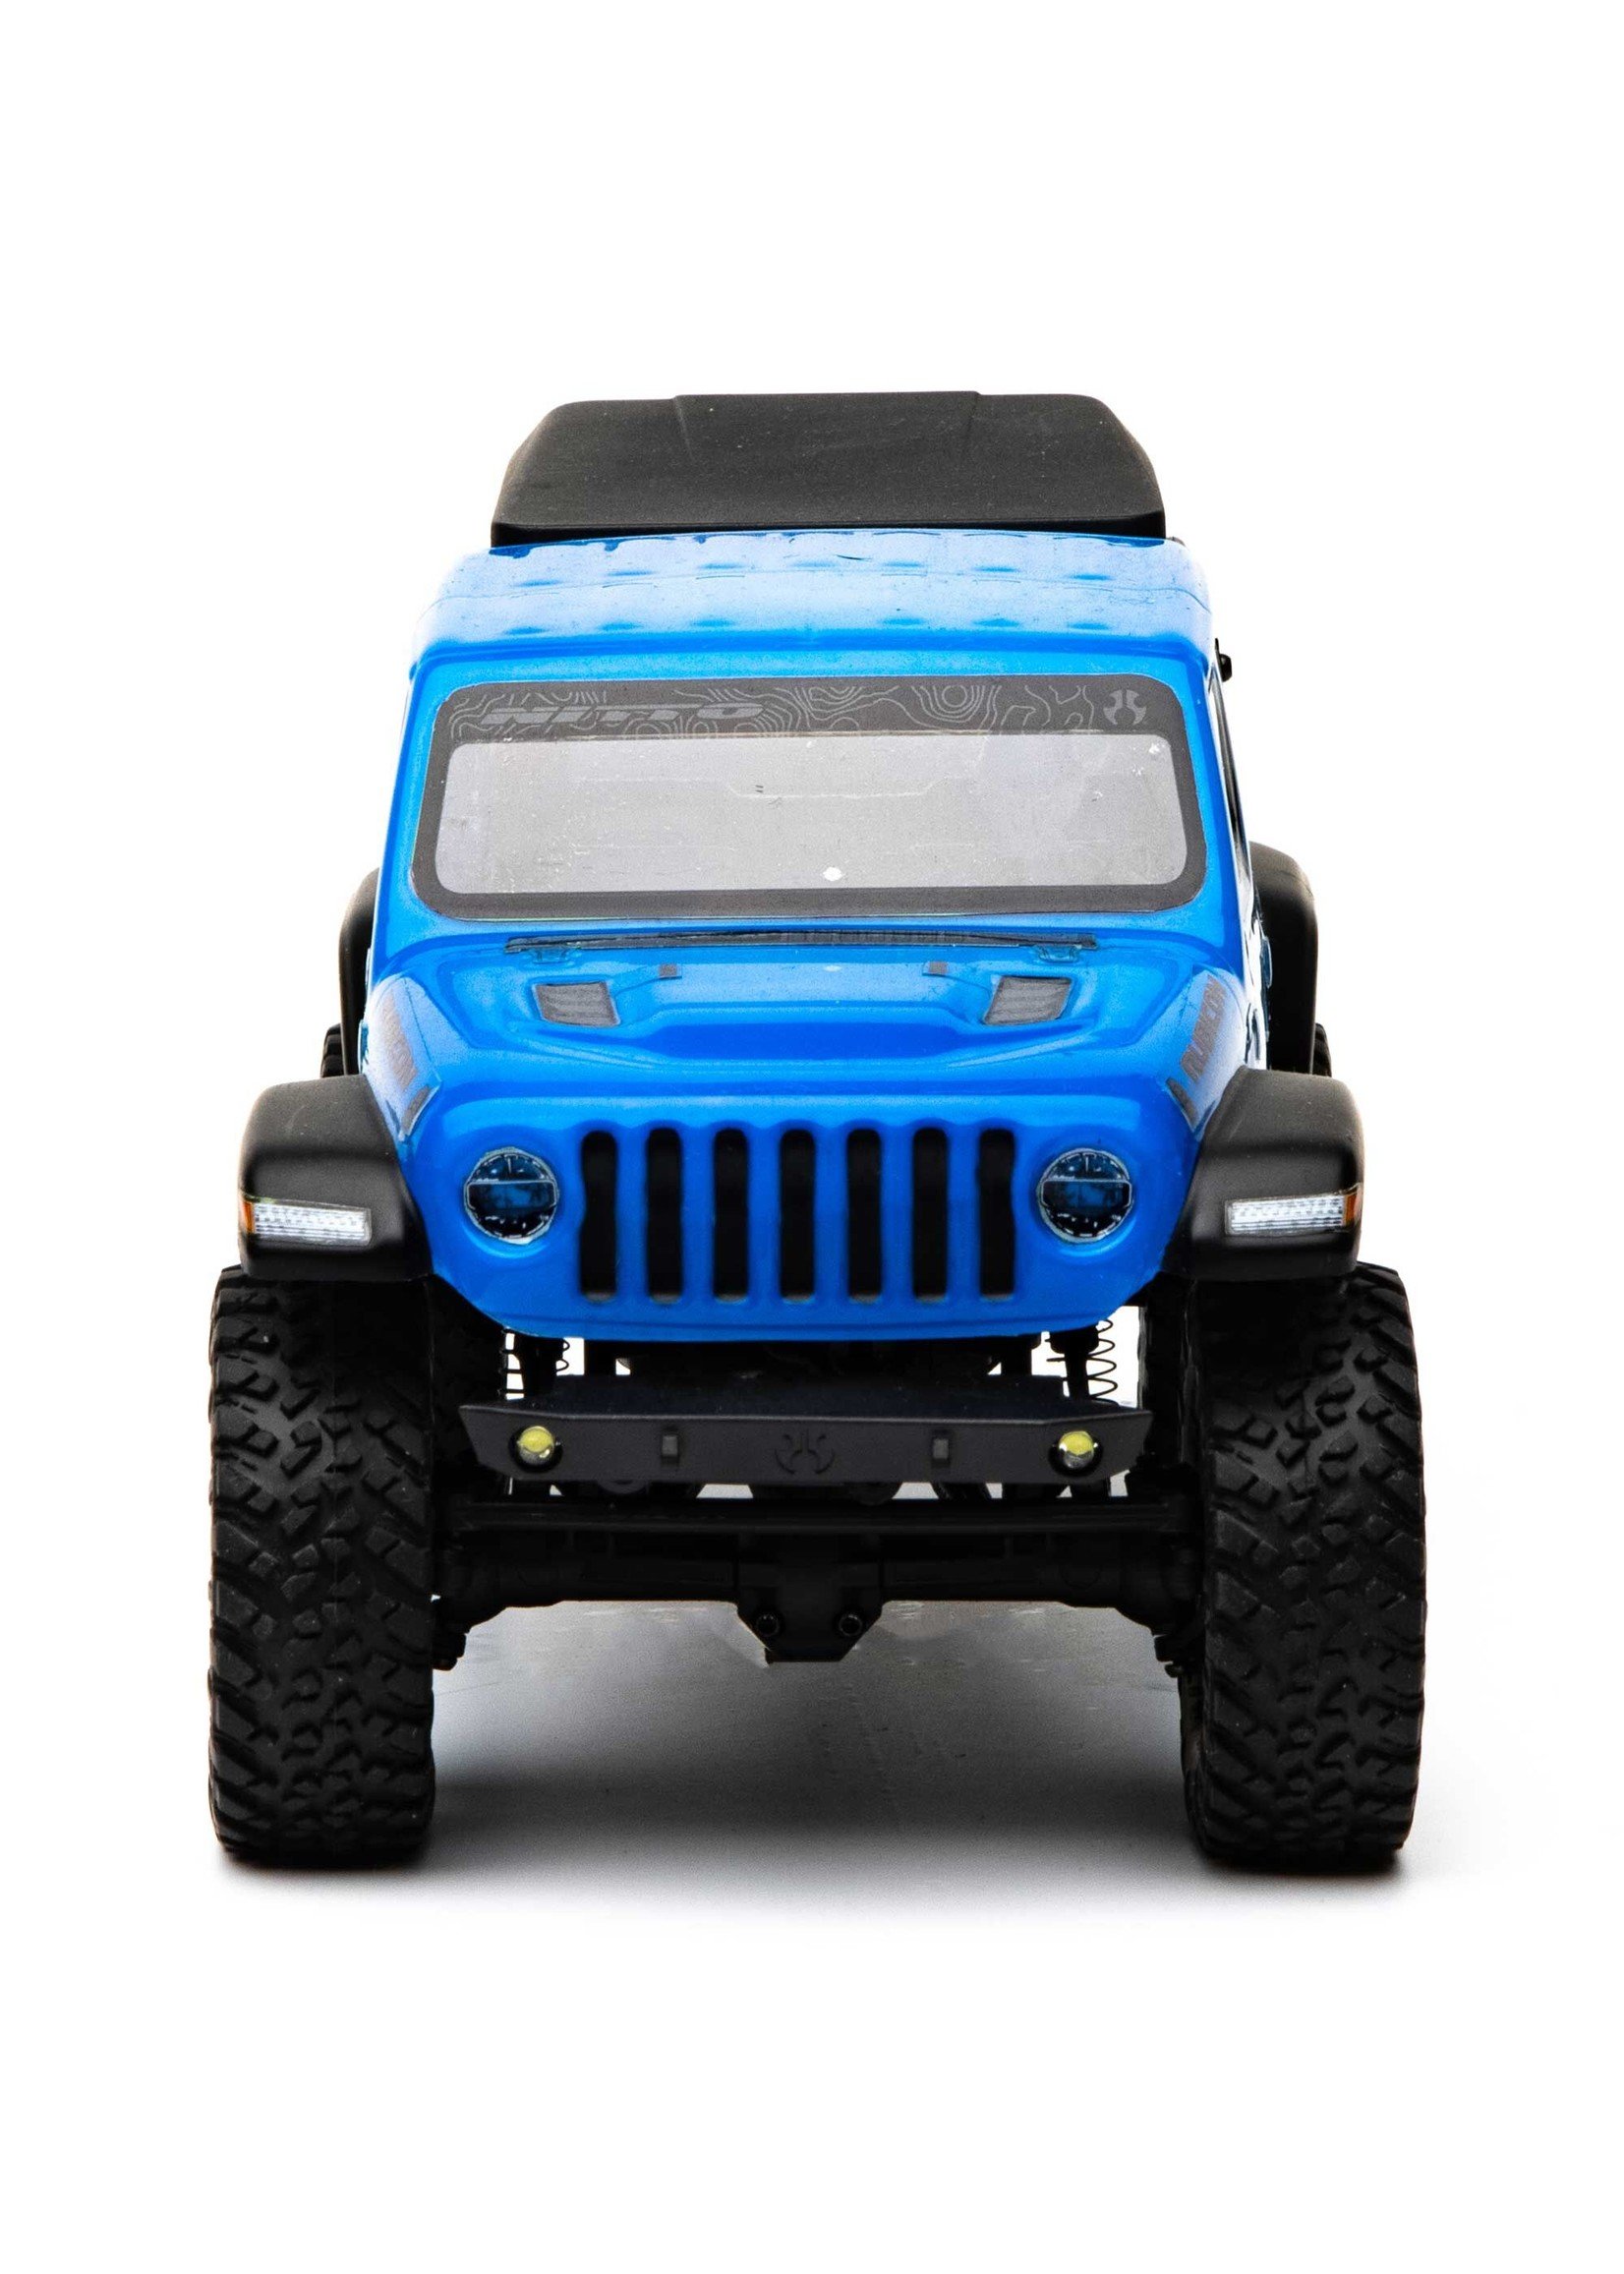 Axial 1/24 SCX24 Jeep JT Gladiator 4WD Rock Crawler Brushed RTR - Blue